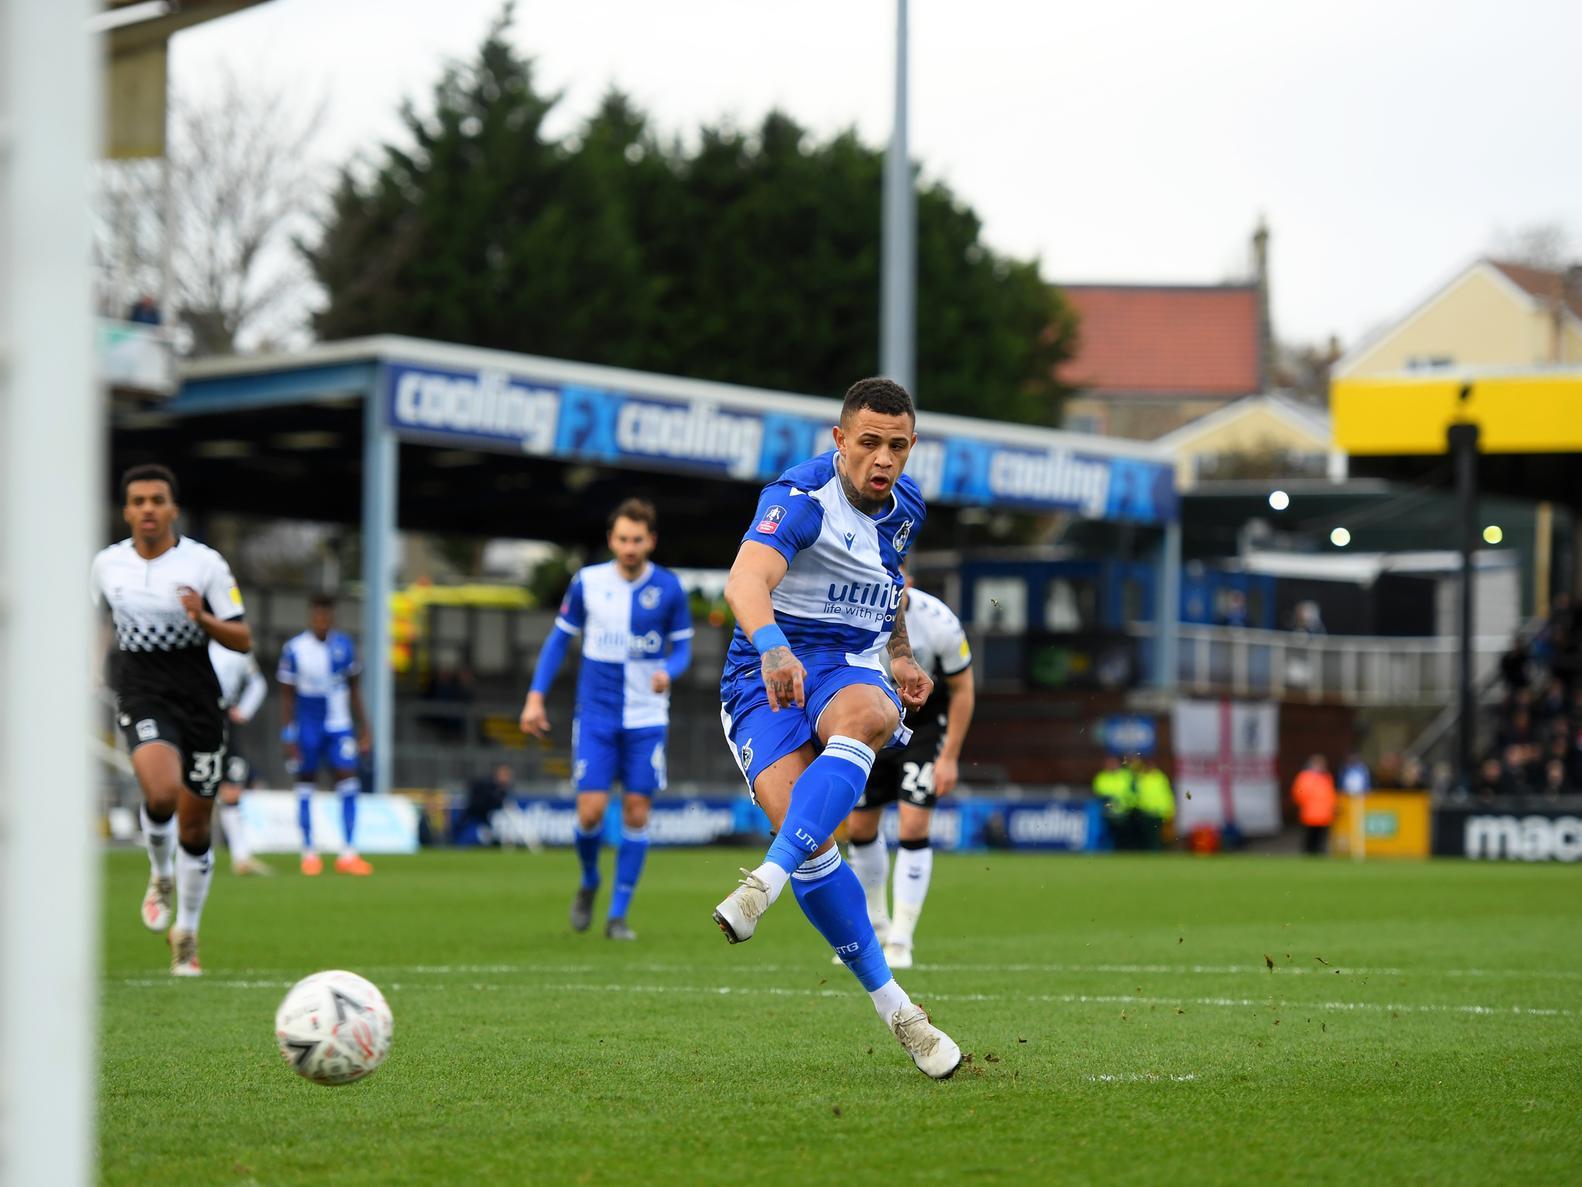 Charlton Athletic are interested in moves for midfielder Ollie Clarke and striker Jonson Clarke-Harris from Bristol Rovers